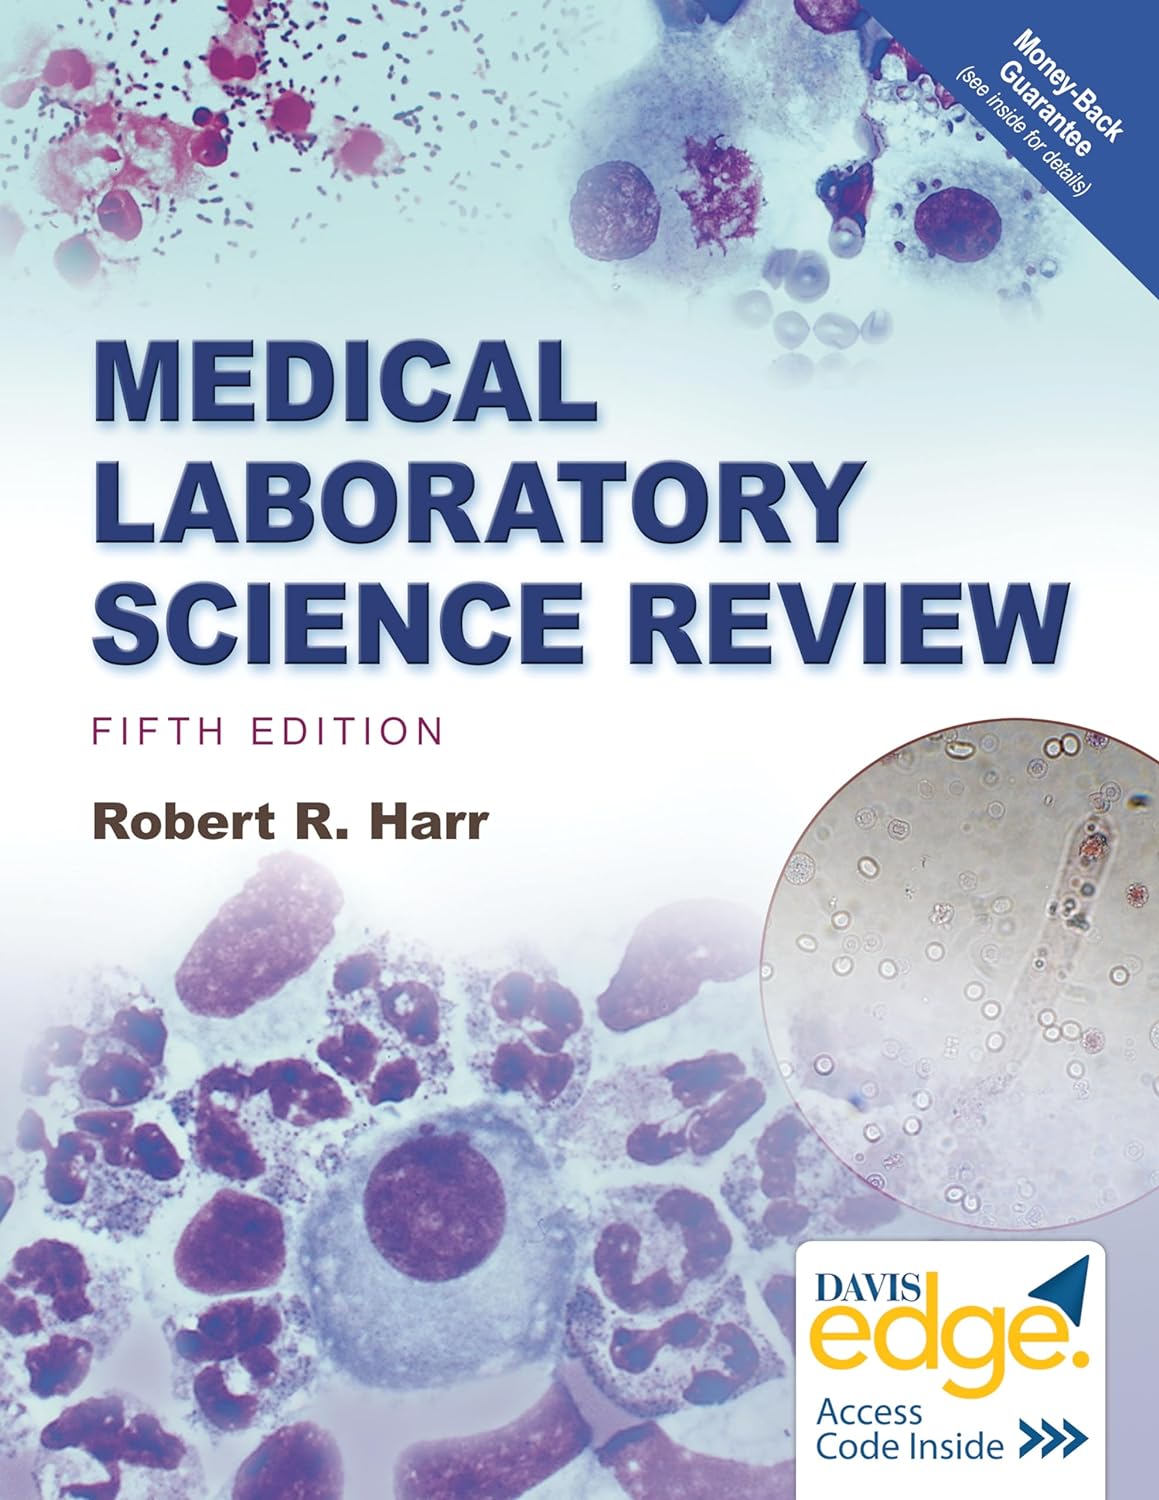 Medical Laboratory Science Review Fifth Edition